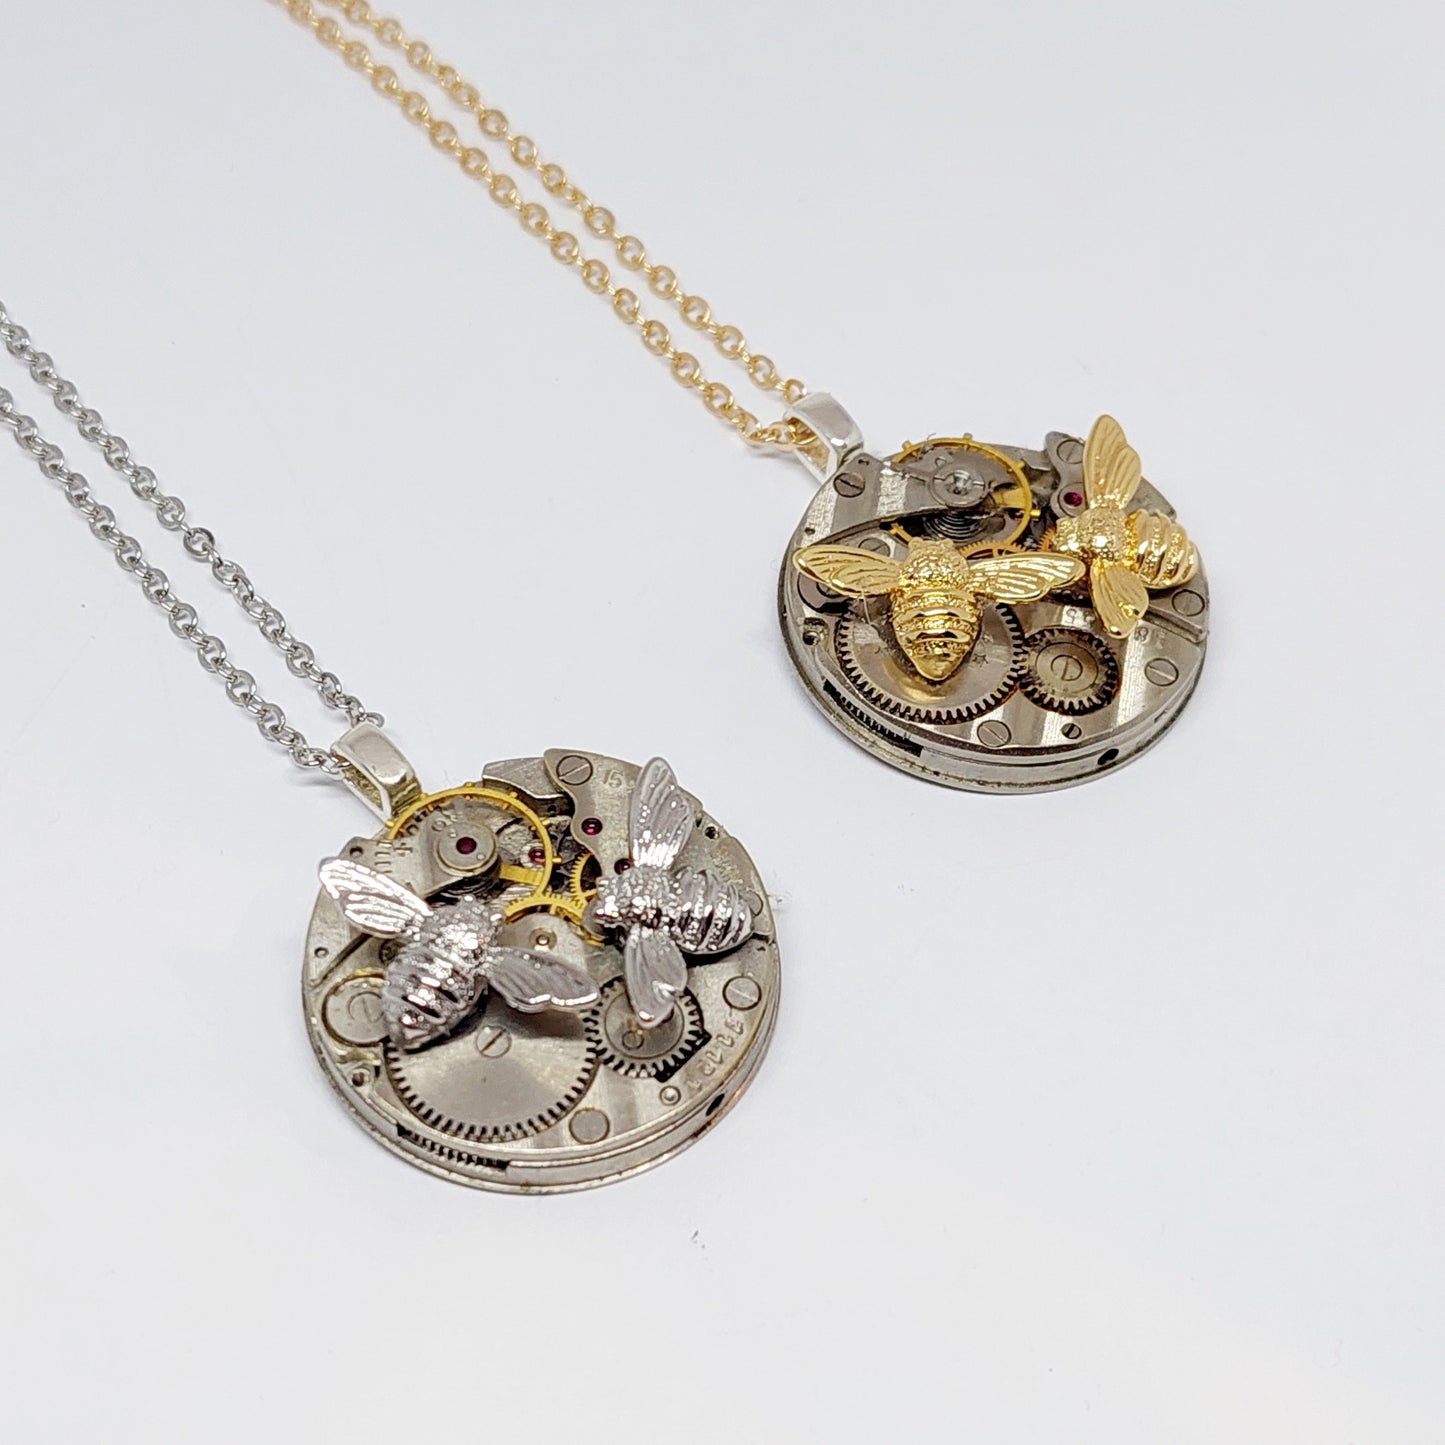 NEW!! Timepiece Pendant with Silver Honeybees